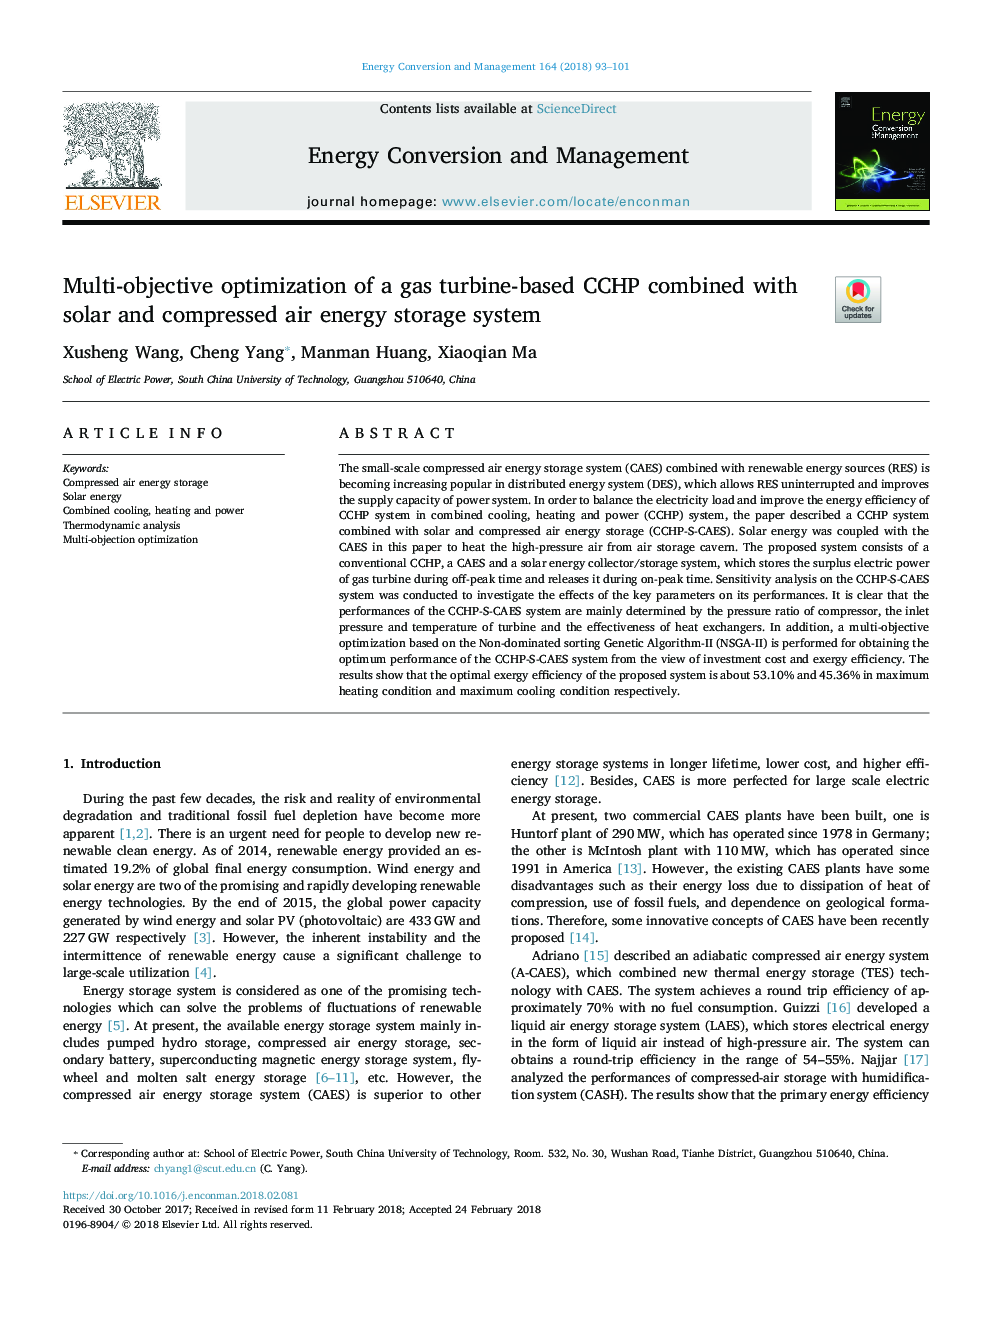 Multi-objective optimization of a gas turbine-based CCHP combined with solar and compressed air energy storage system